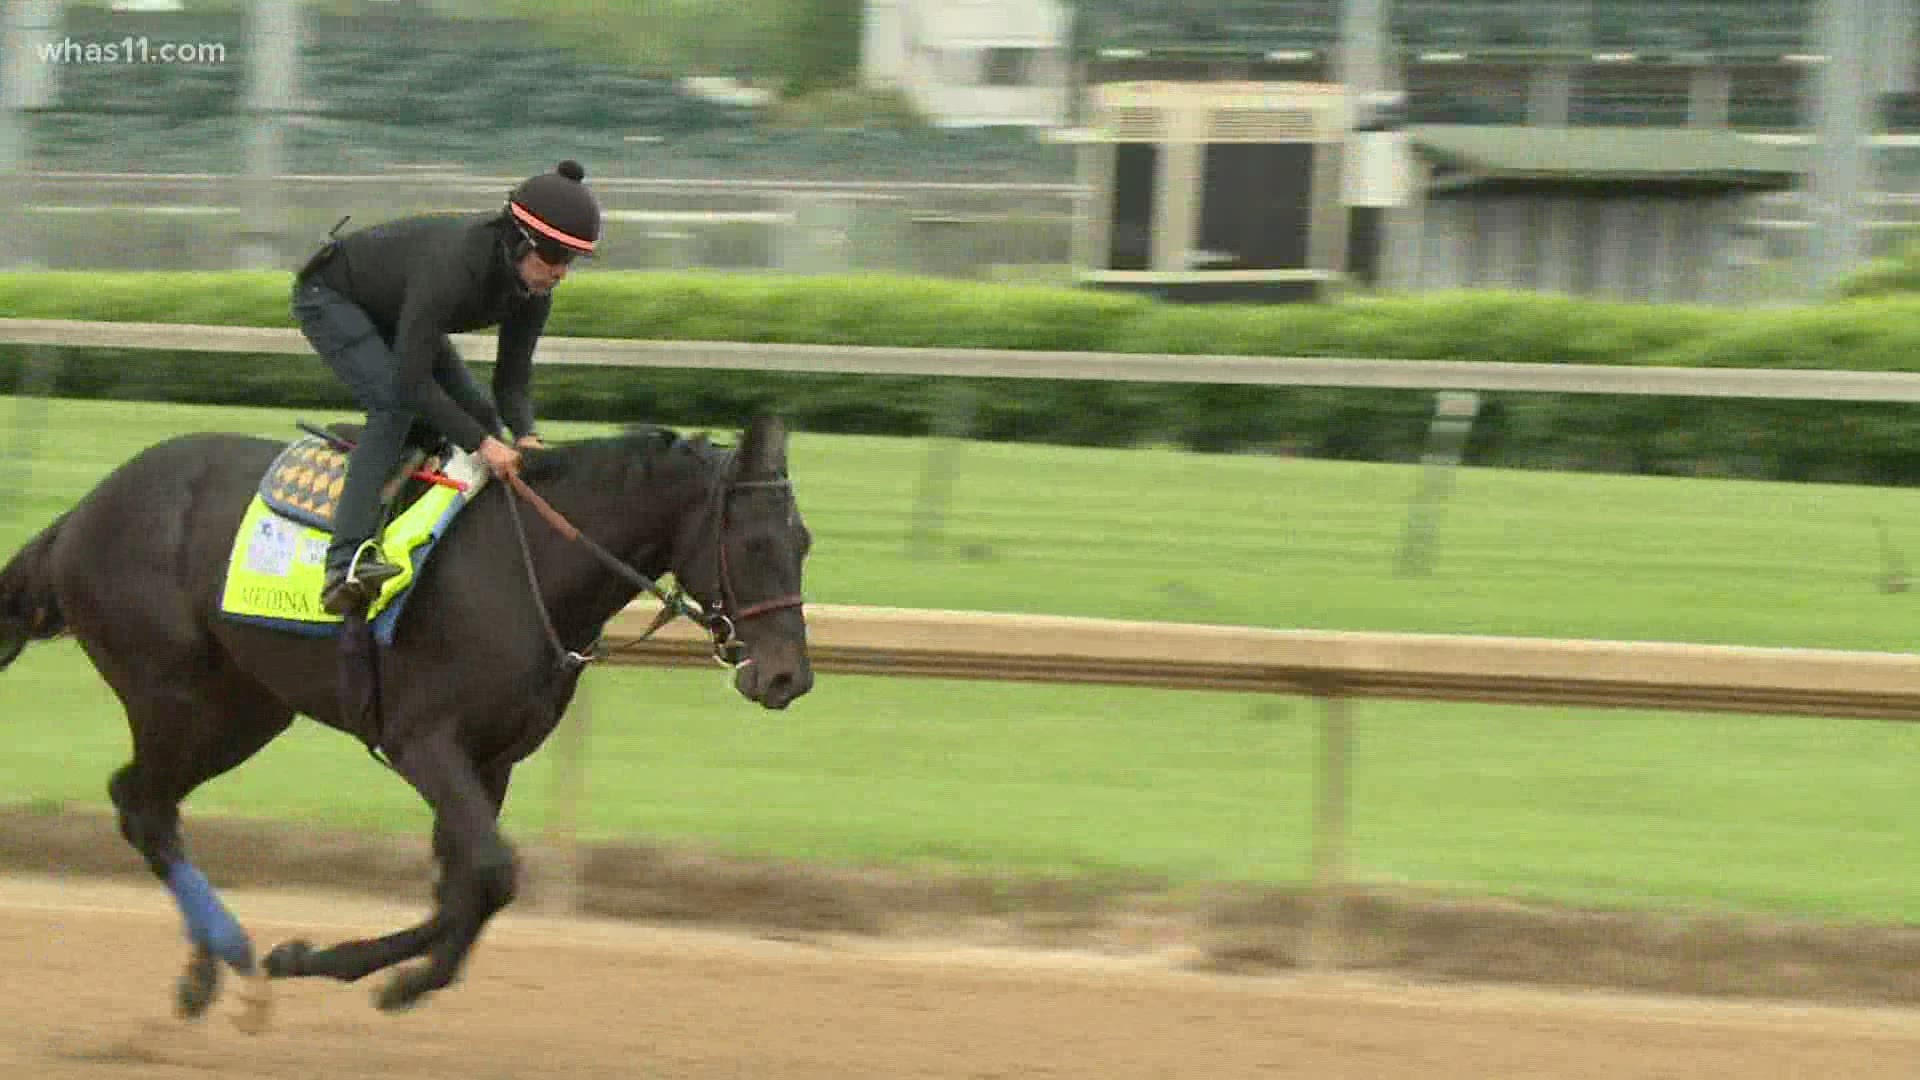 The horse failed a drug test following the Kentucky Derby, calling his win into question. [video: WTSP]